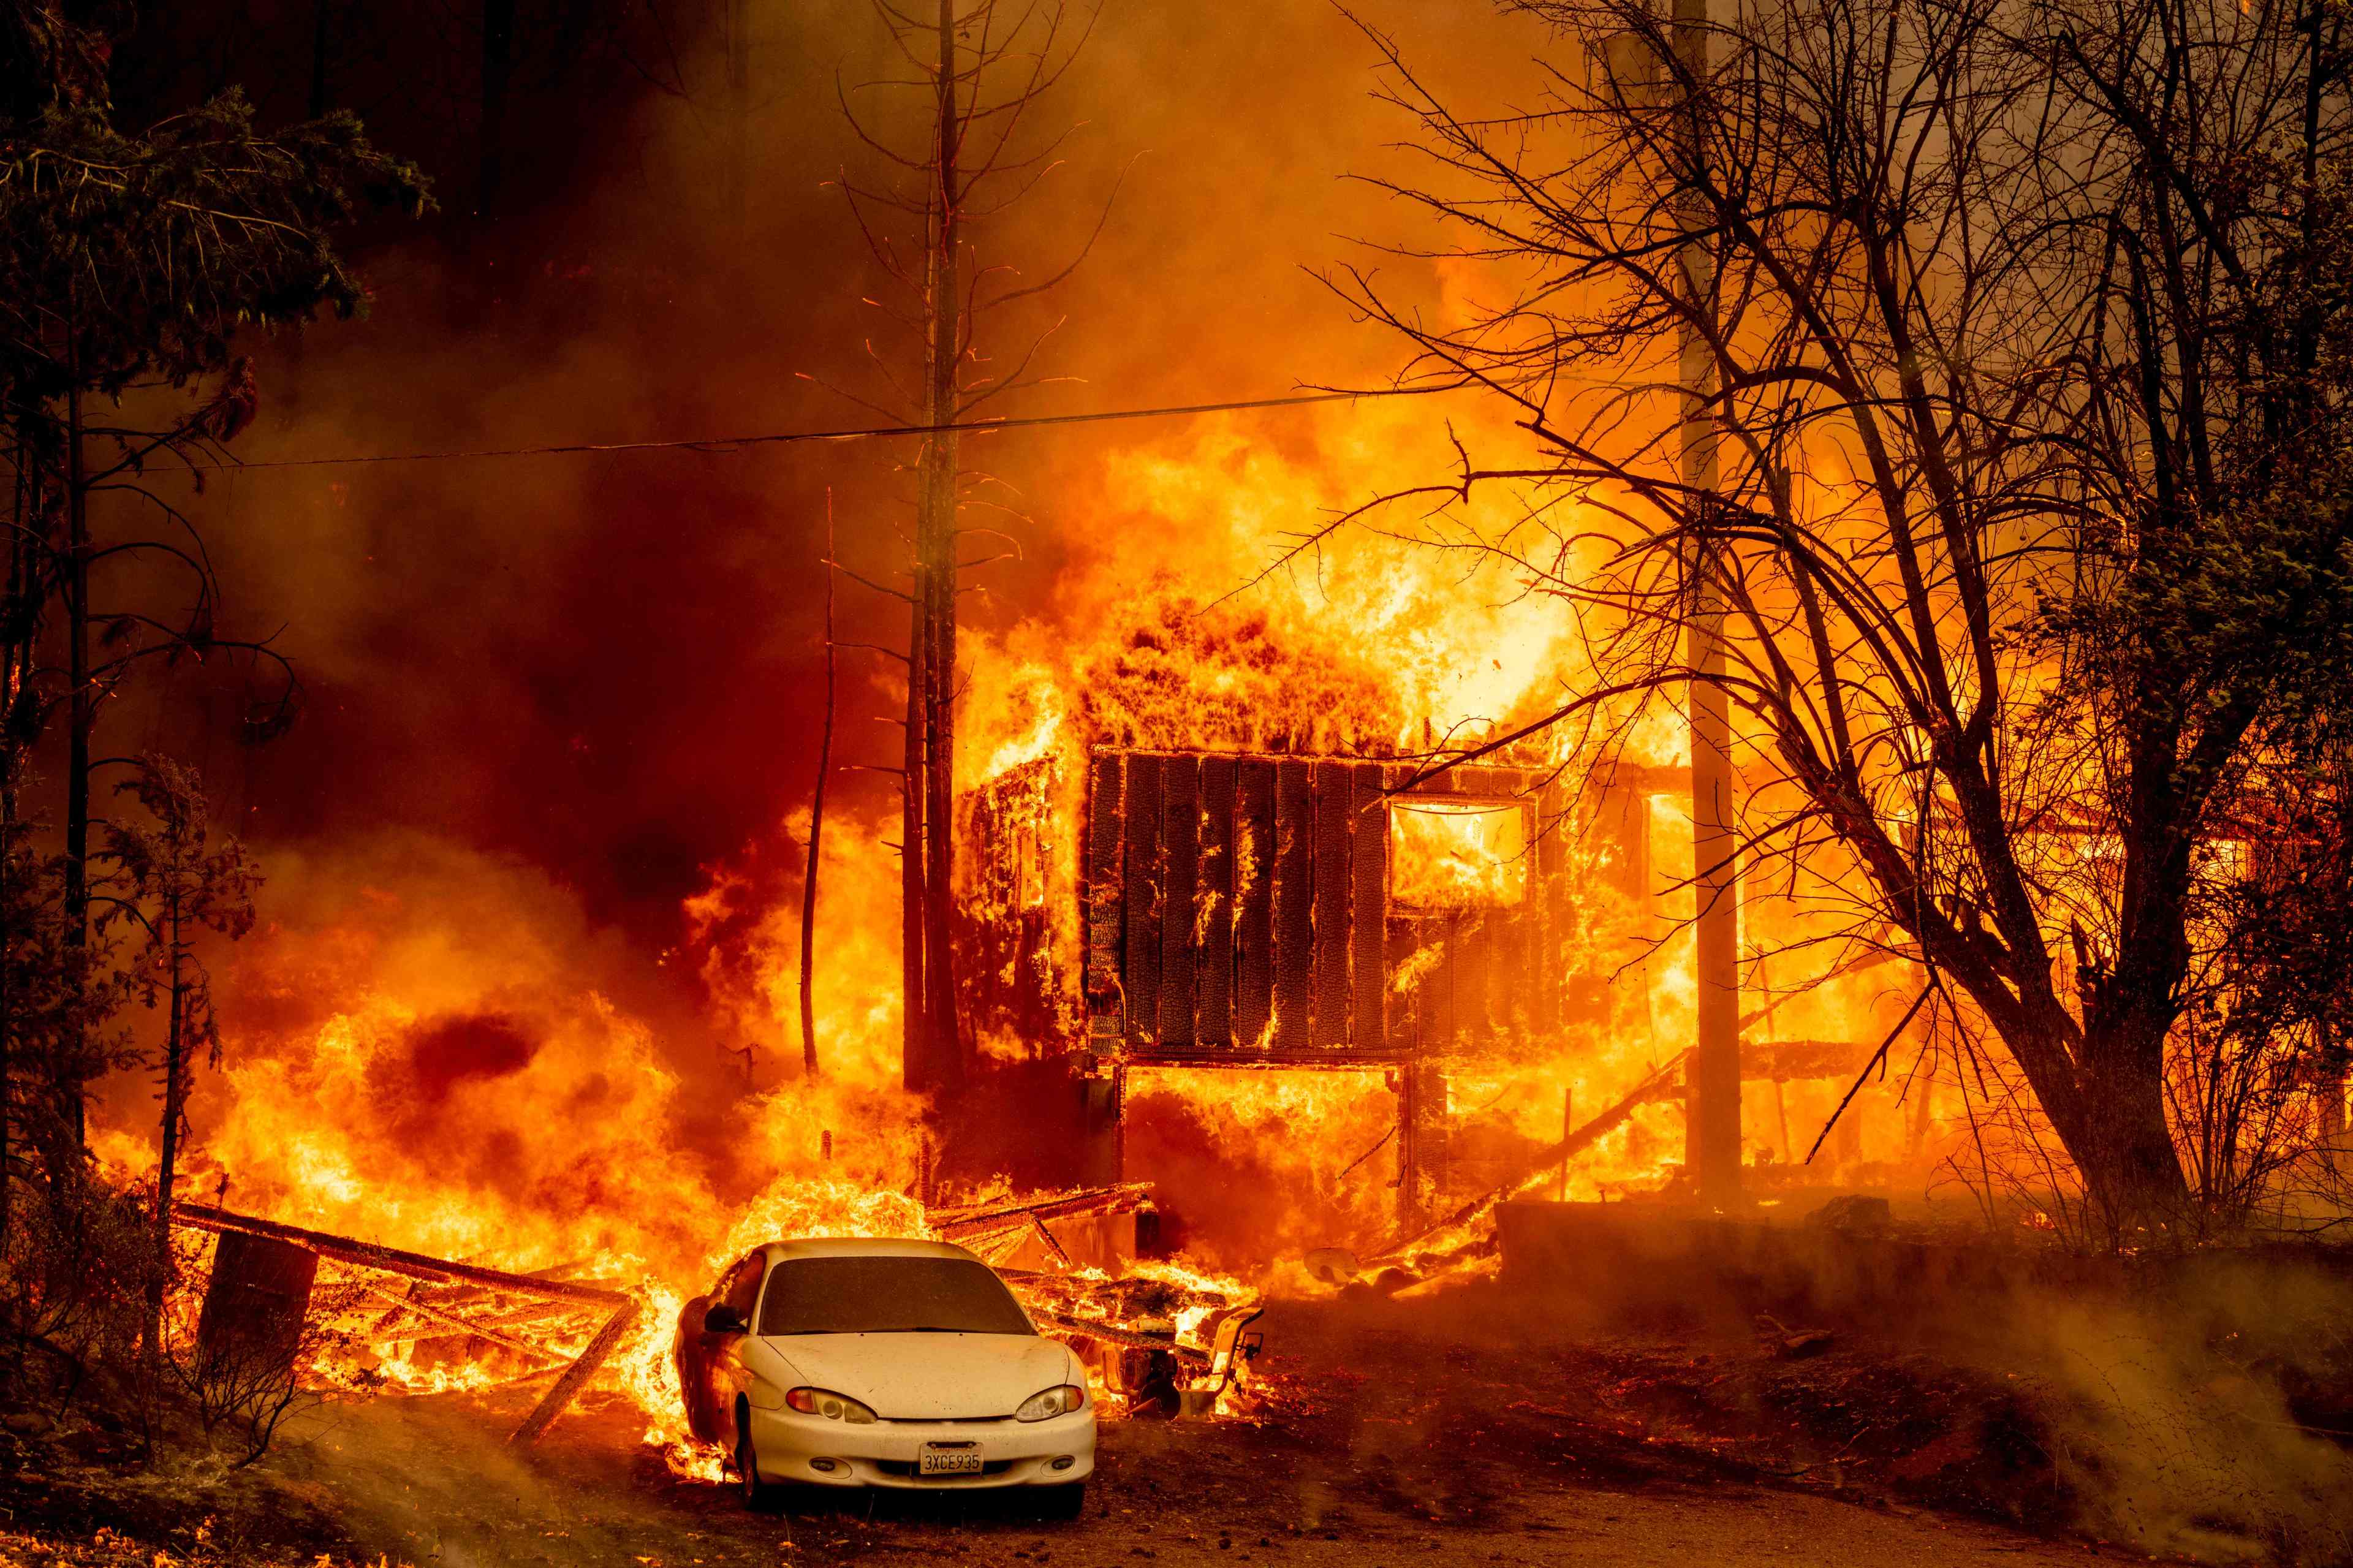 A car parked in front of a house engulfed in flames, with intense fire and smoke around it.